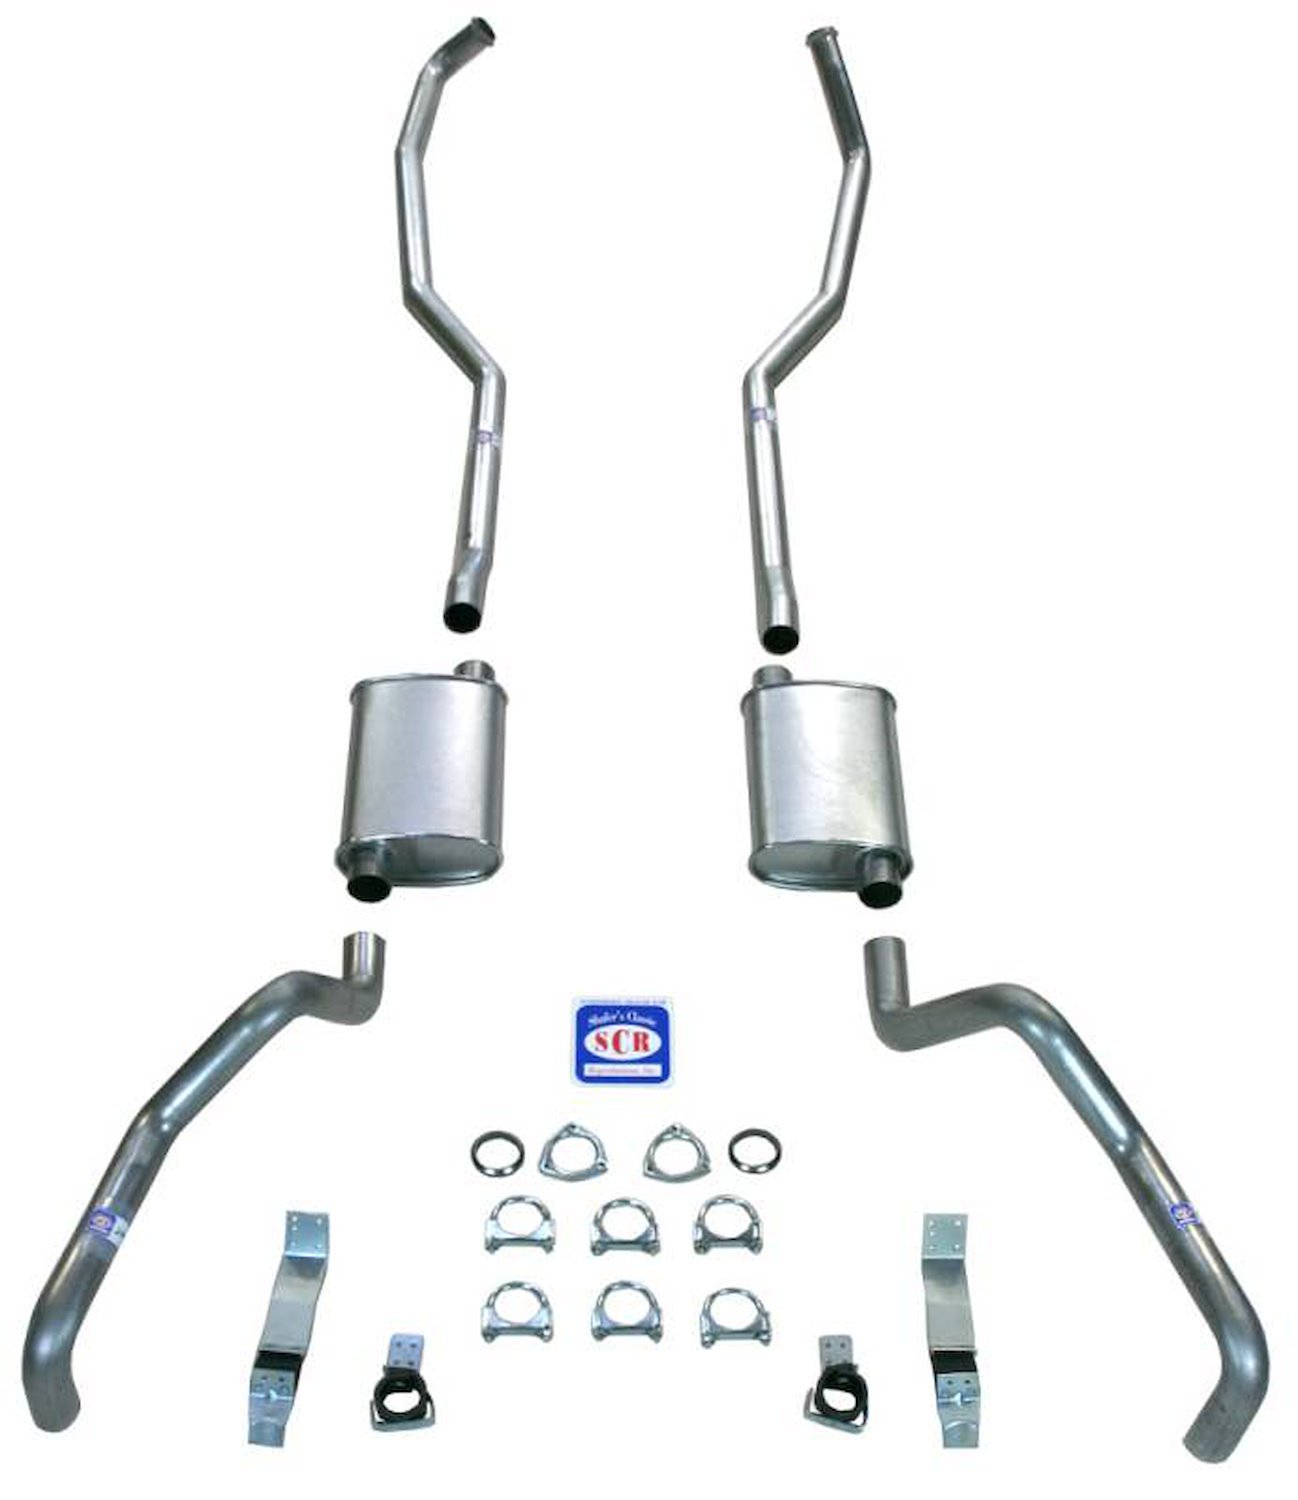 23026S 1967-1969 Camaro 2-1/2 in. Exhaust System w/ Big Block w/ Cast Iron Manifolds, 304 Stainless Steel